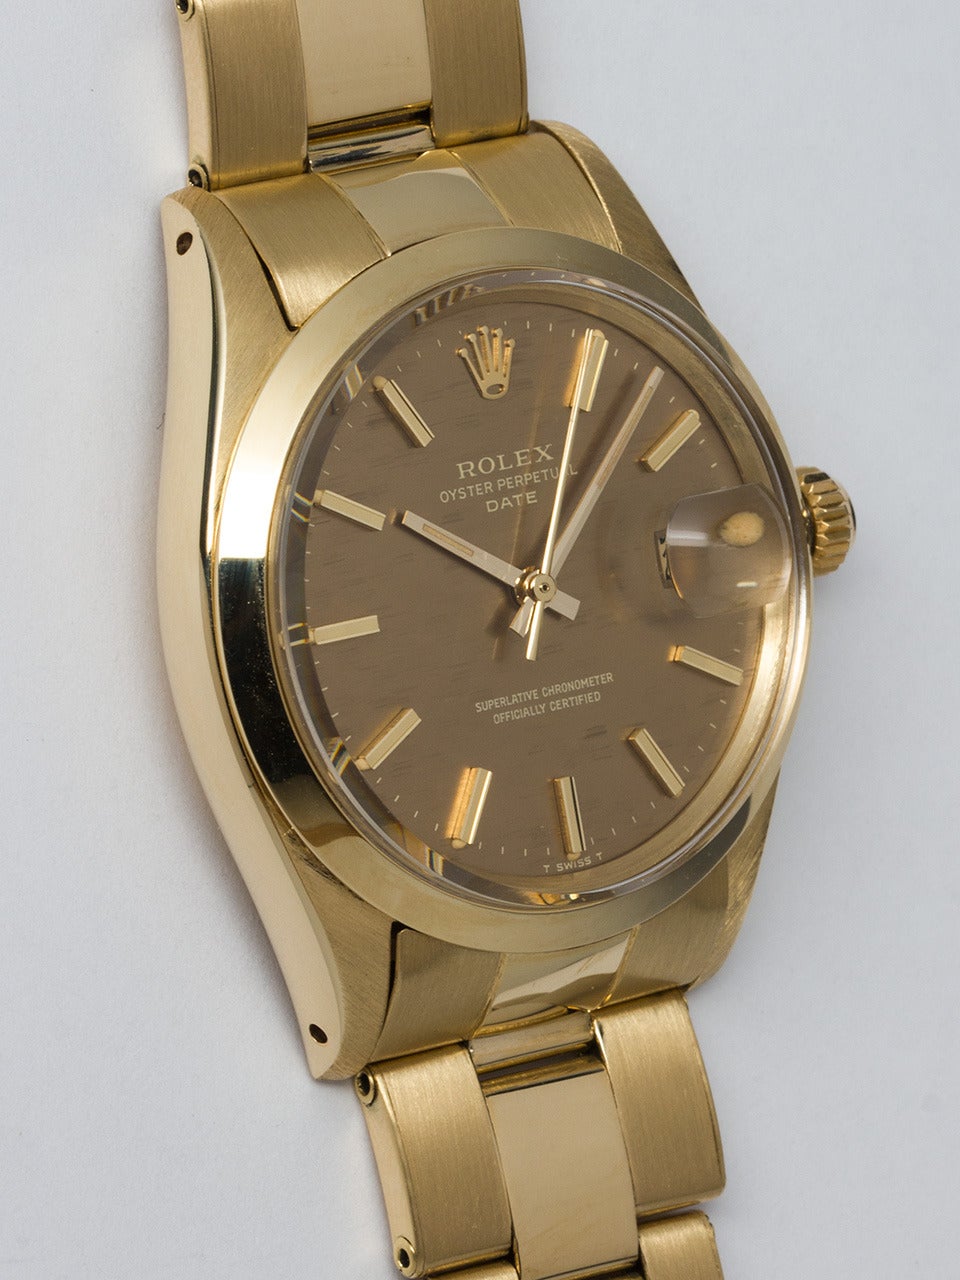 Rolex 14K Yellow Gold Oyster Perpetual Date Wristwatch ref 1501 serial # 3.2 million circa 1972. 34mm diameter case with smooth bezel and acrylic crystal. Lovely original bronze fine linen texture dial with gold applied indexes and gold baton hands.